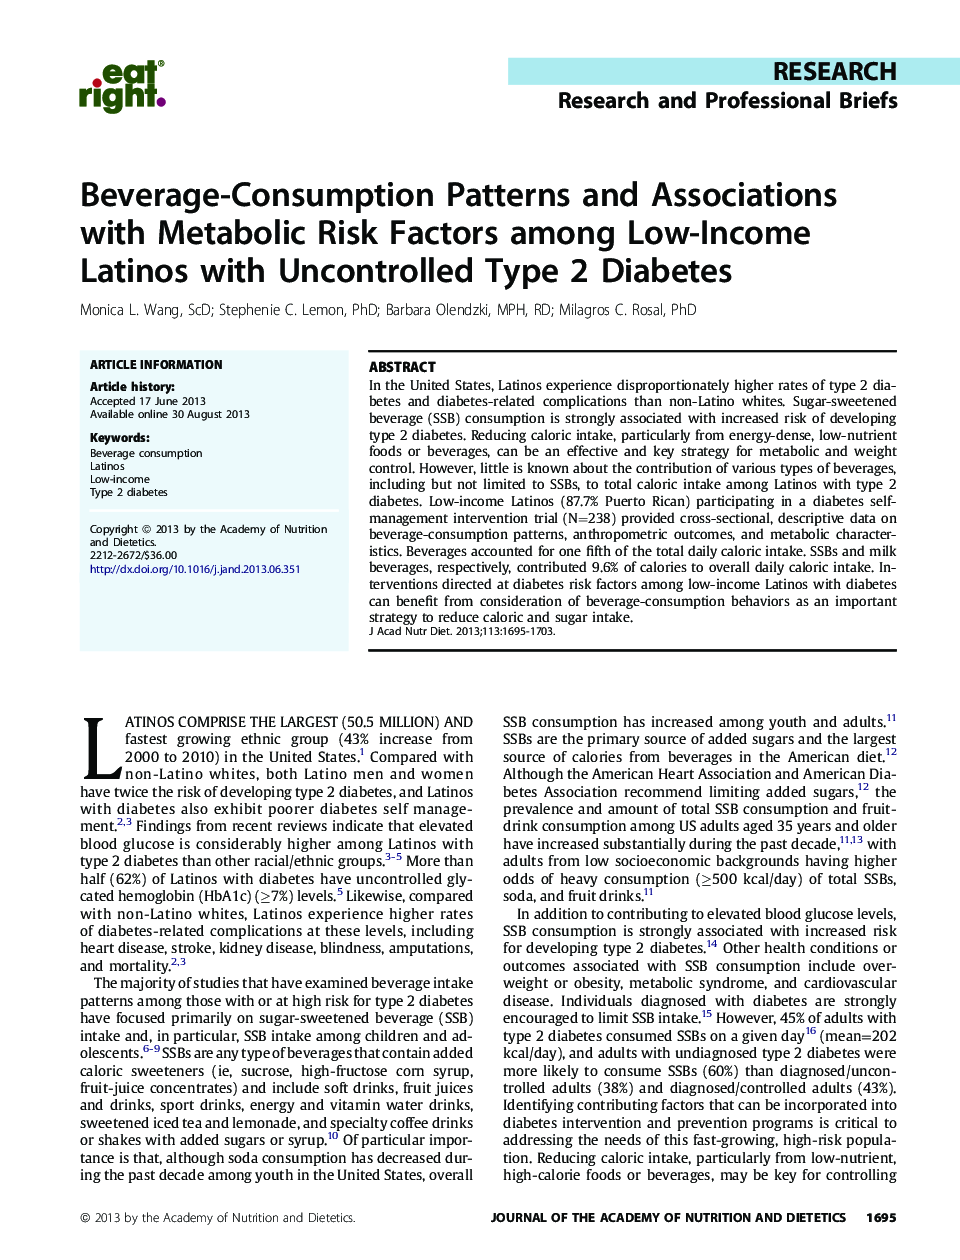 Beverage-Consumption Patterns and Associations with Metabolic Risk Factors among Low-Income Latinos with Uncontrolled Type 2 Diabetes 